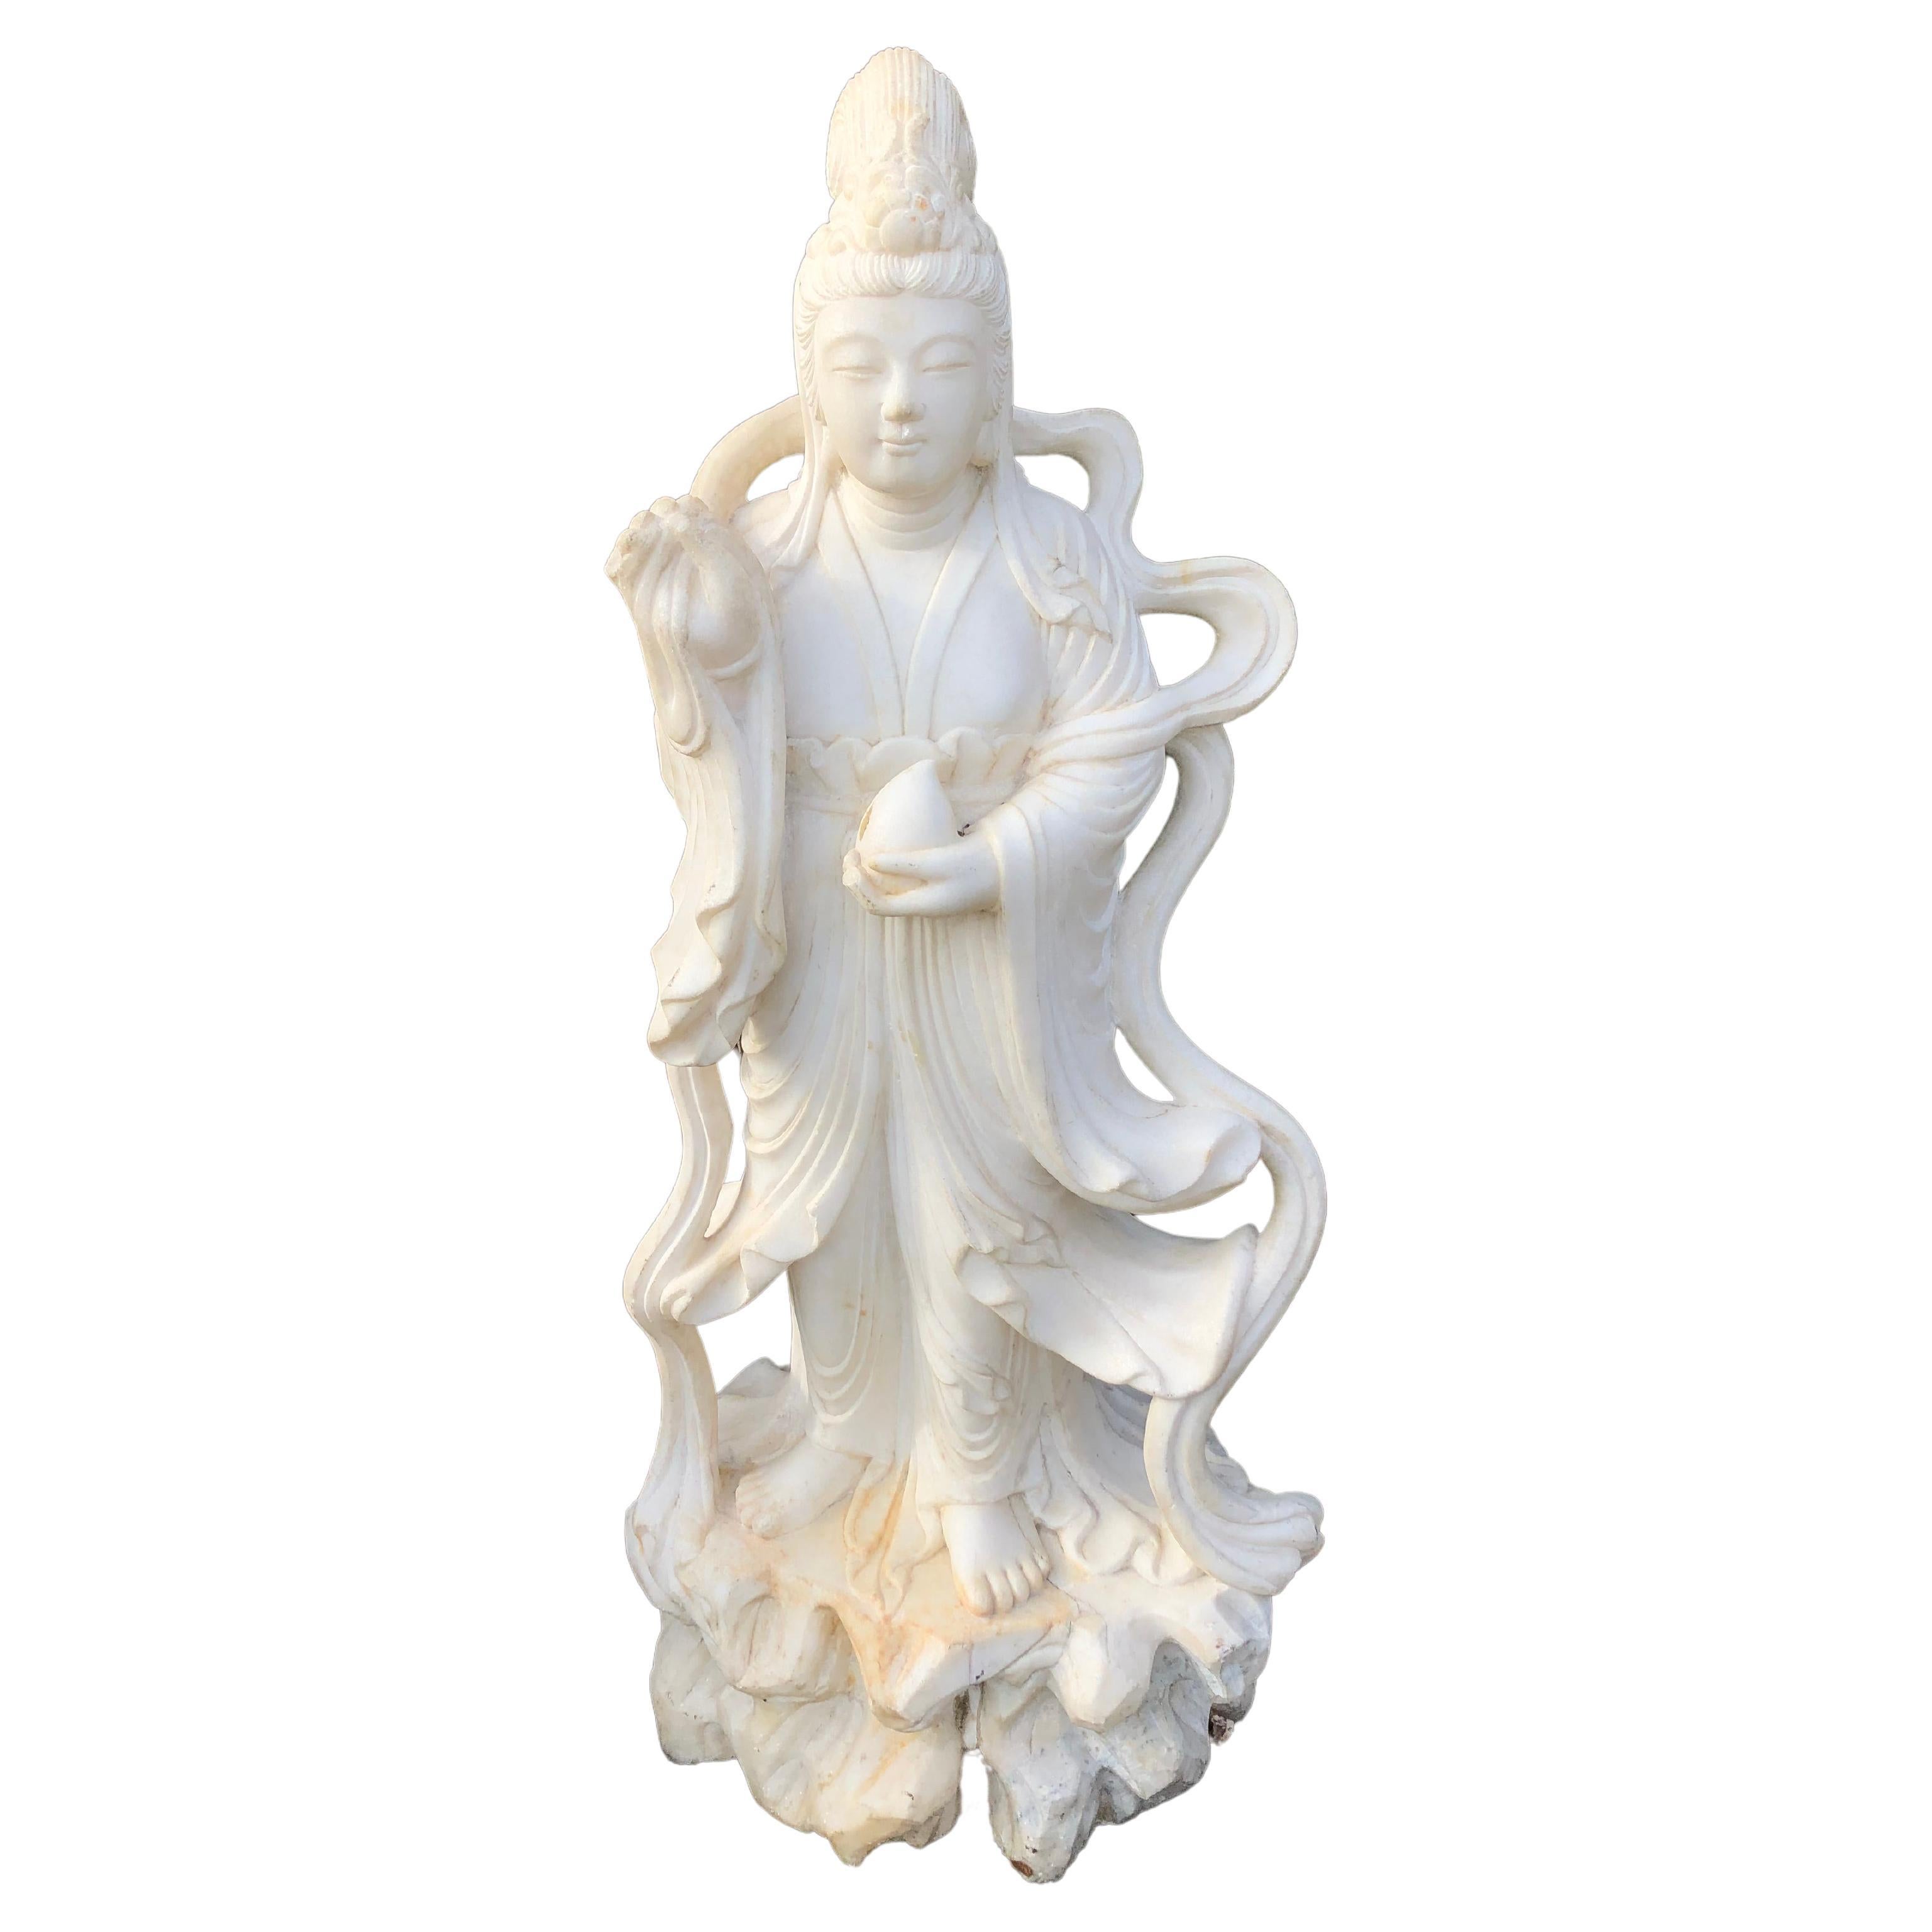 Splendid Impressively Large Life Size Chinese Guan Yin Marble Figure For Sale